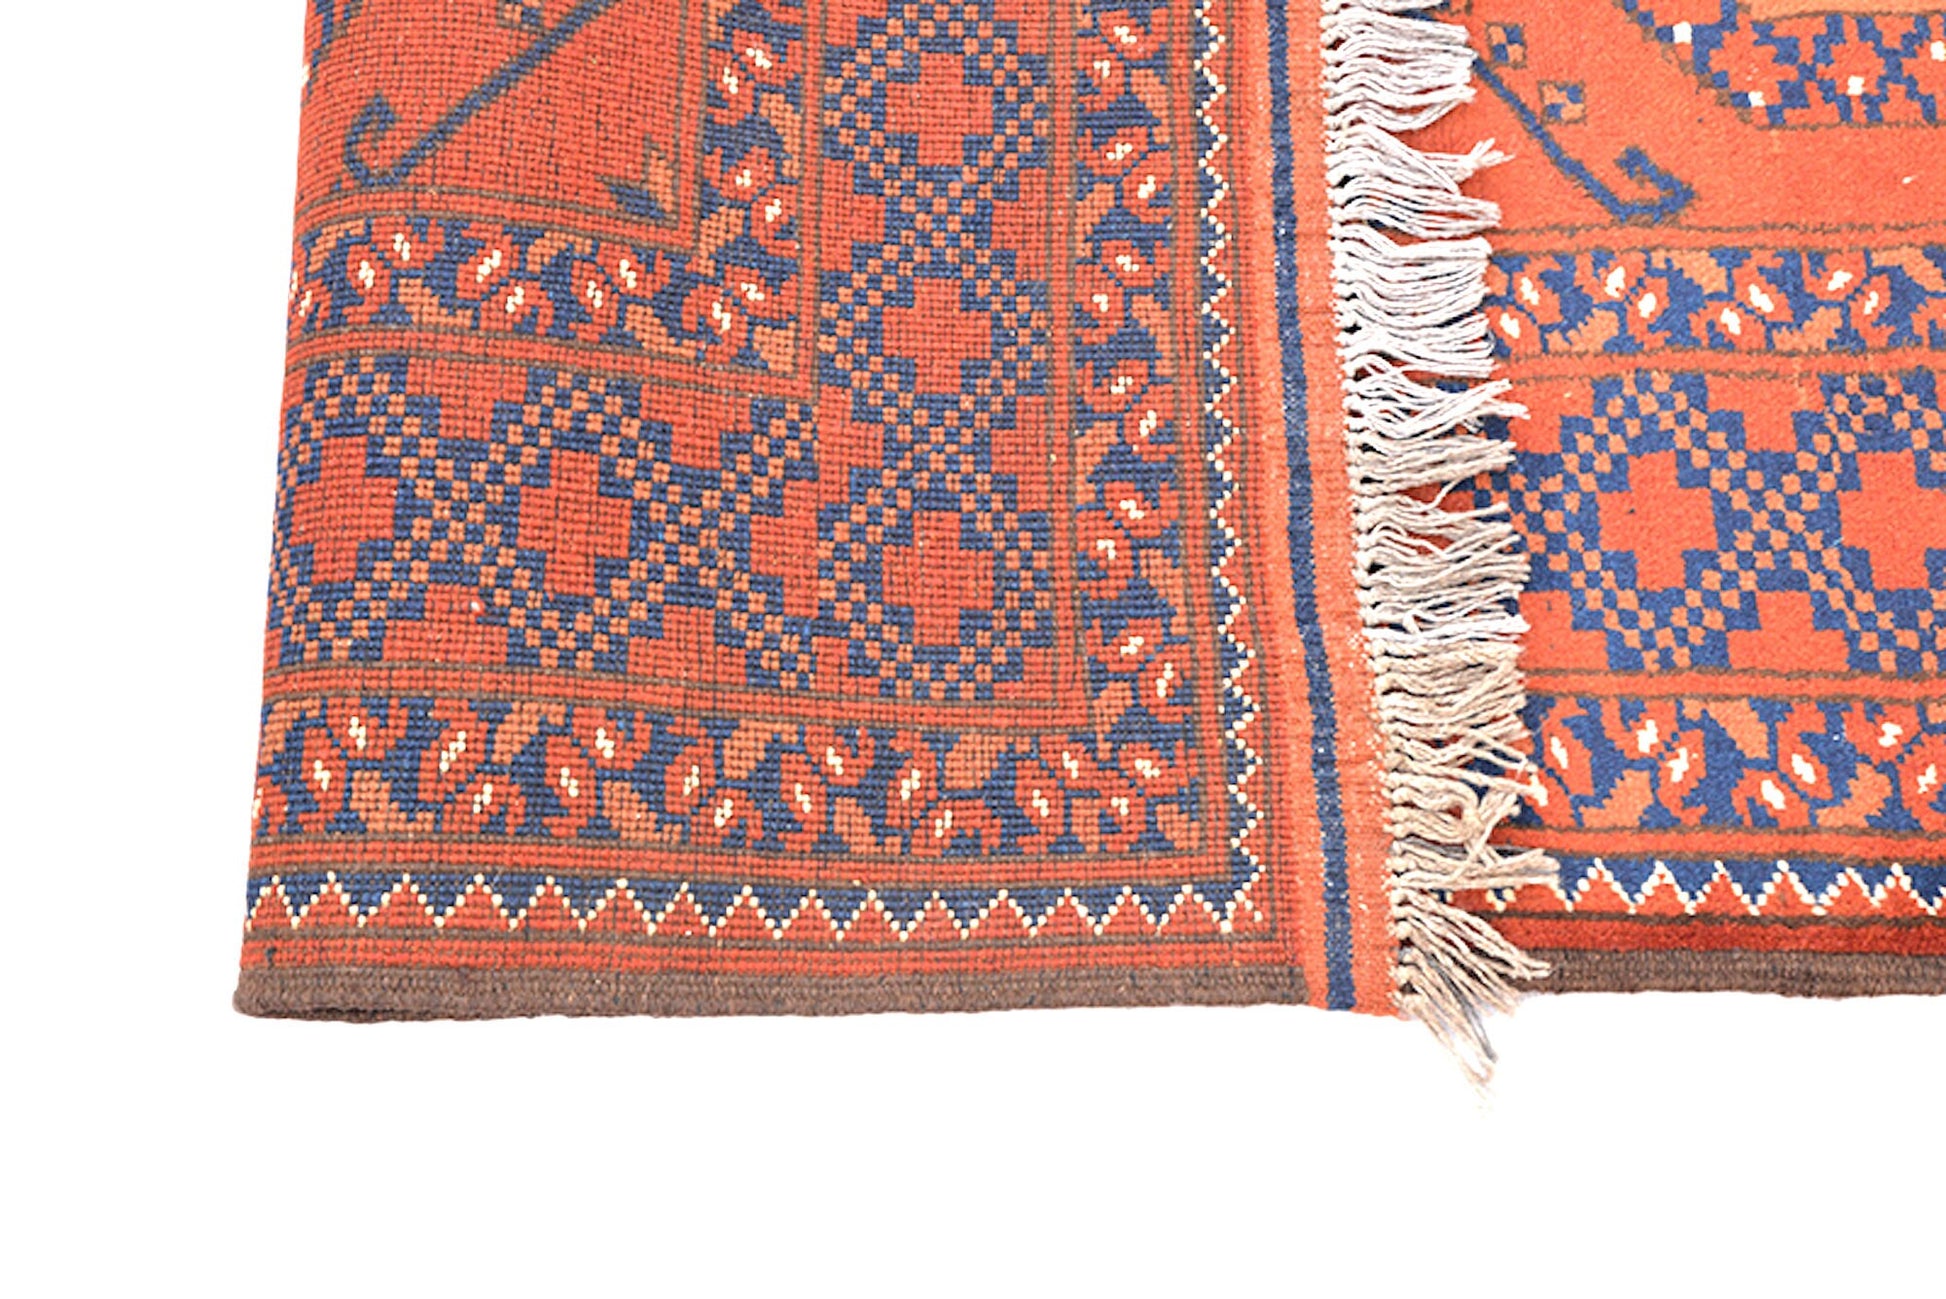 Rusty Orange Blue Small Persian Afghan Oriental Rug | Accent Home Geometric Rug | Bright Orange | Hand Woven Wool Antique Rug